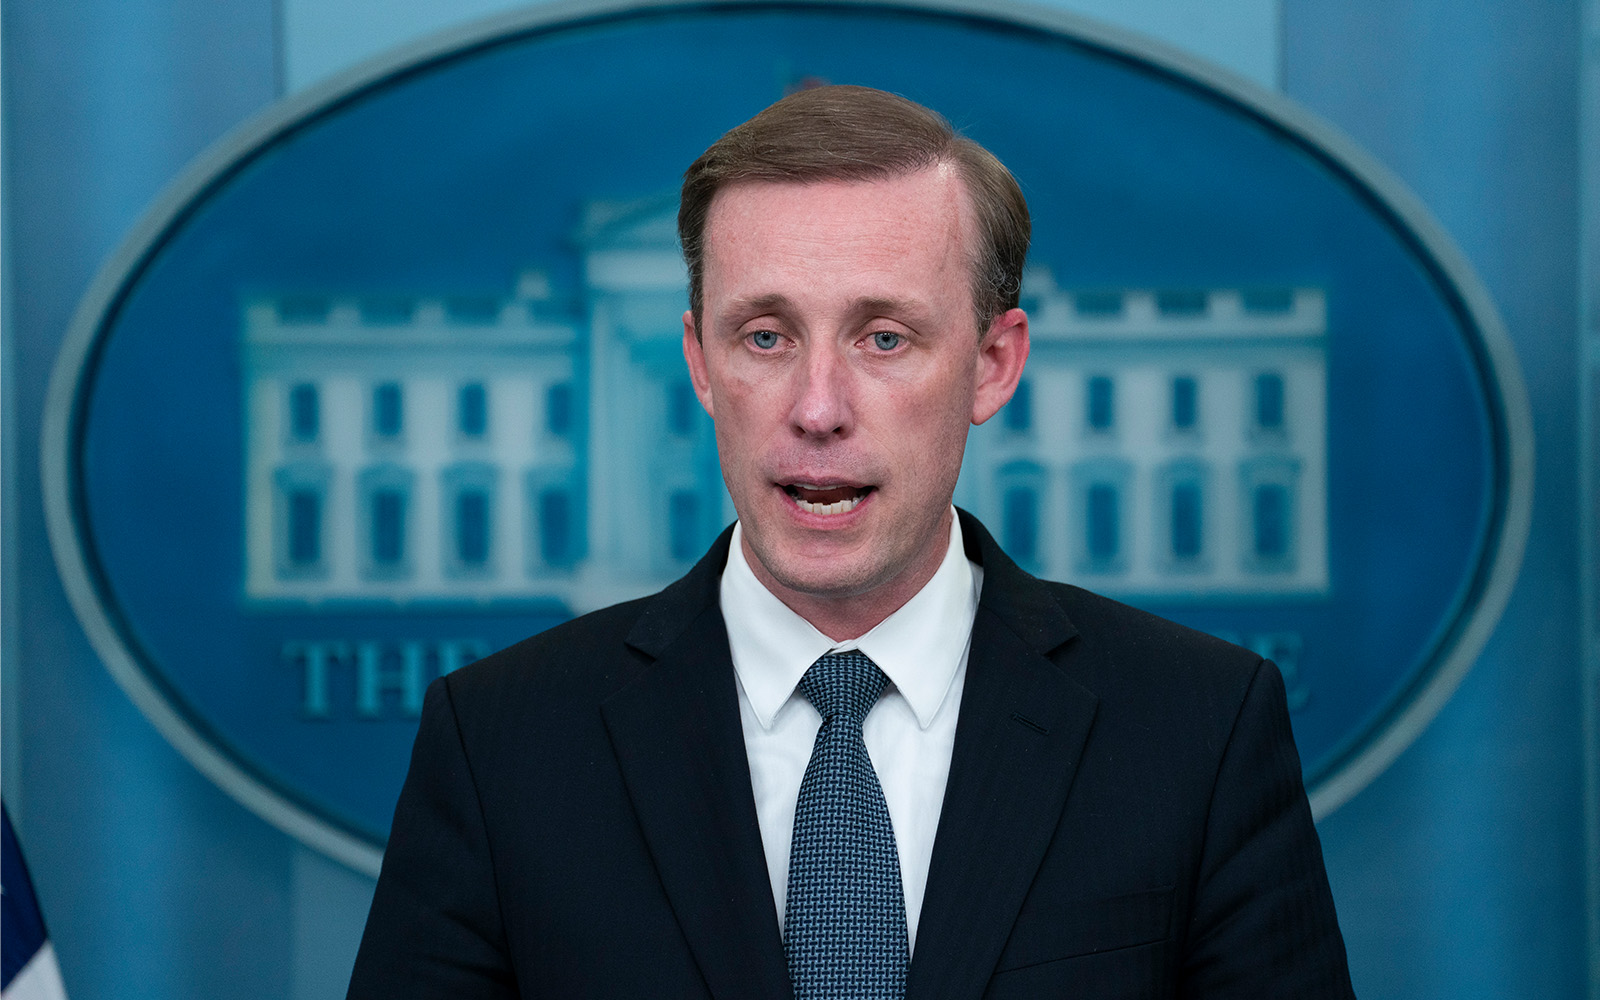 White House national security adviser Jake Sullivan speaks during a press briefing at the White House, July 11, 2022, in Washington. (AP Photo/Evan Vucci)